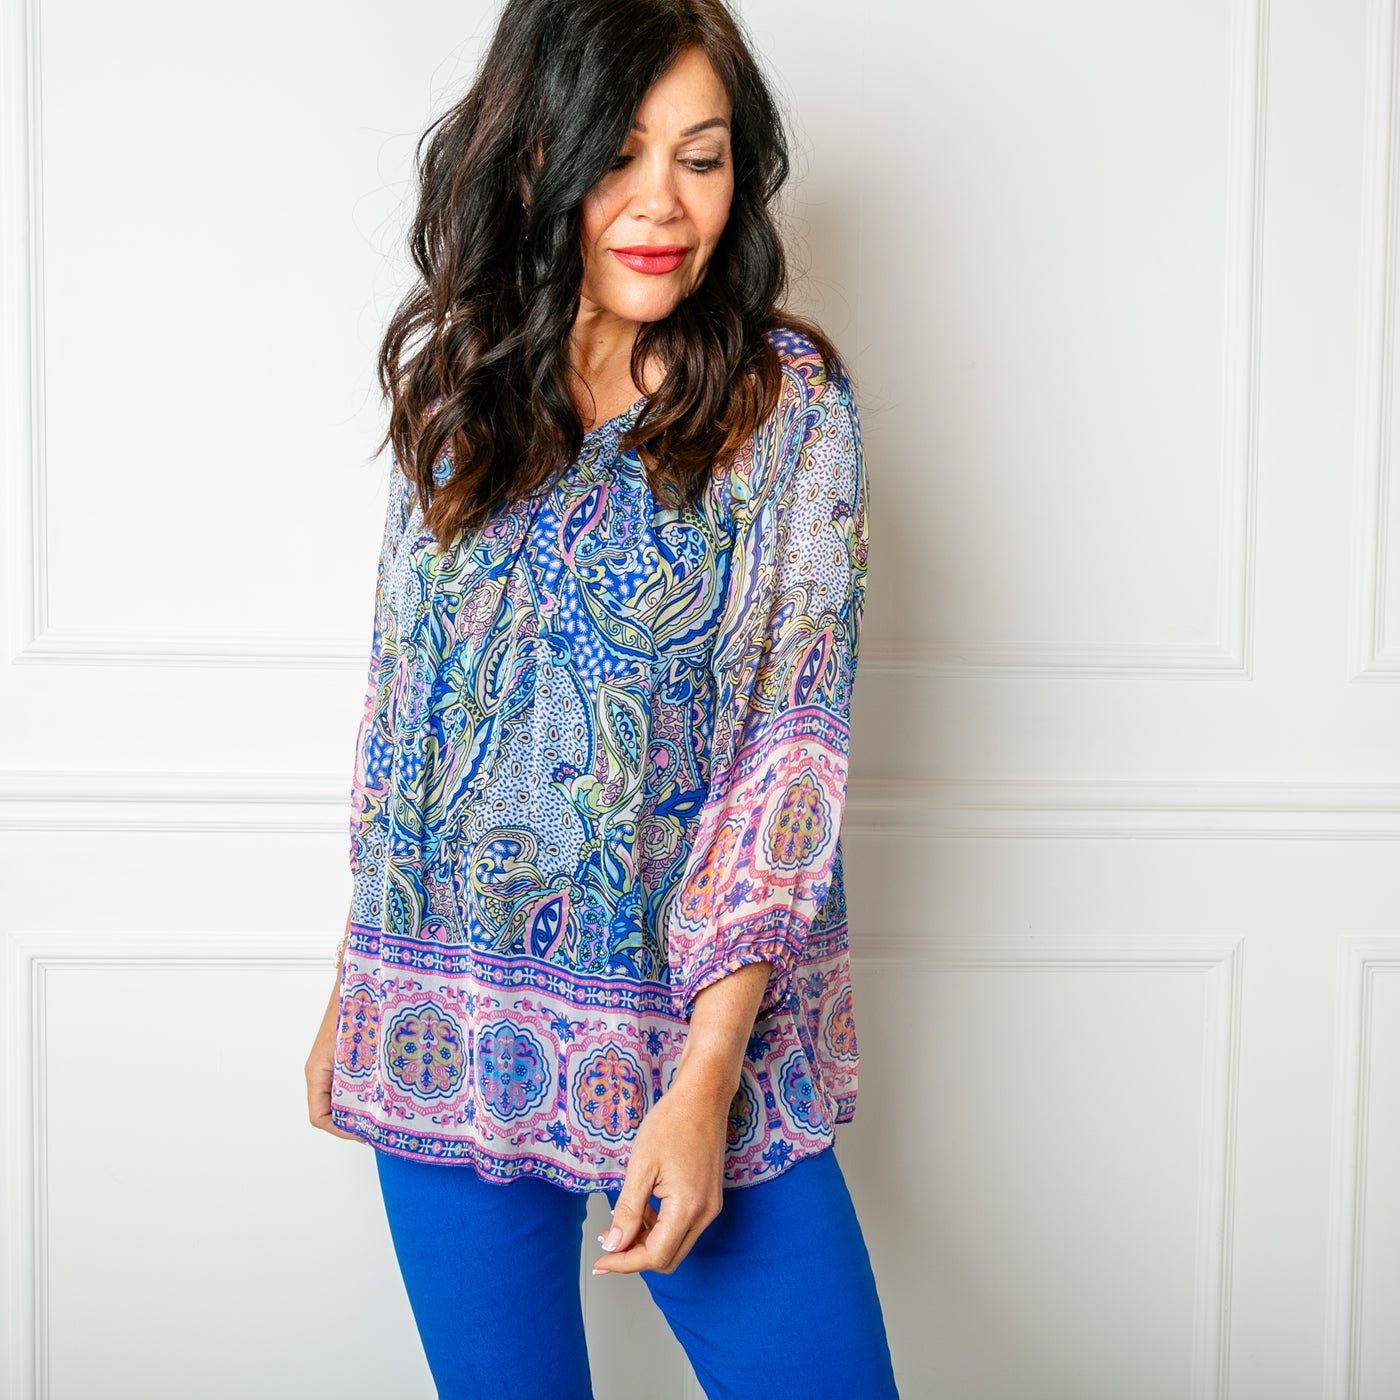 The royal blue Silk Blend Paisley Top in a beautiful, intrciate paisley print with a stretchy lining underneath